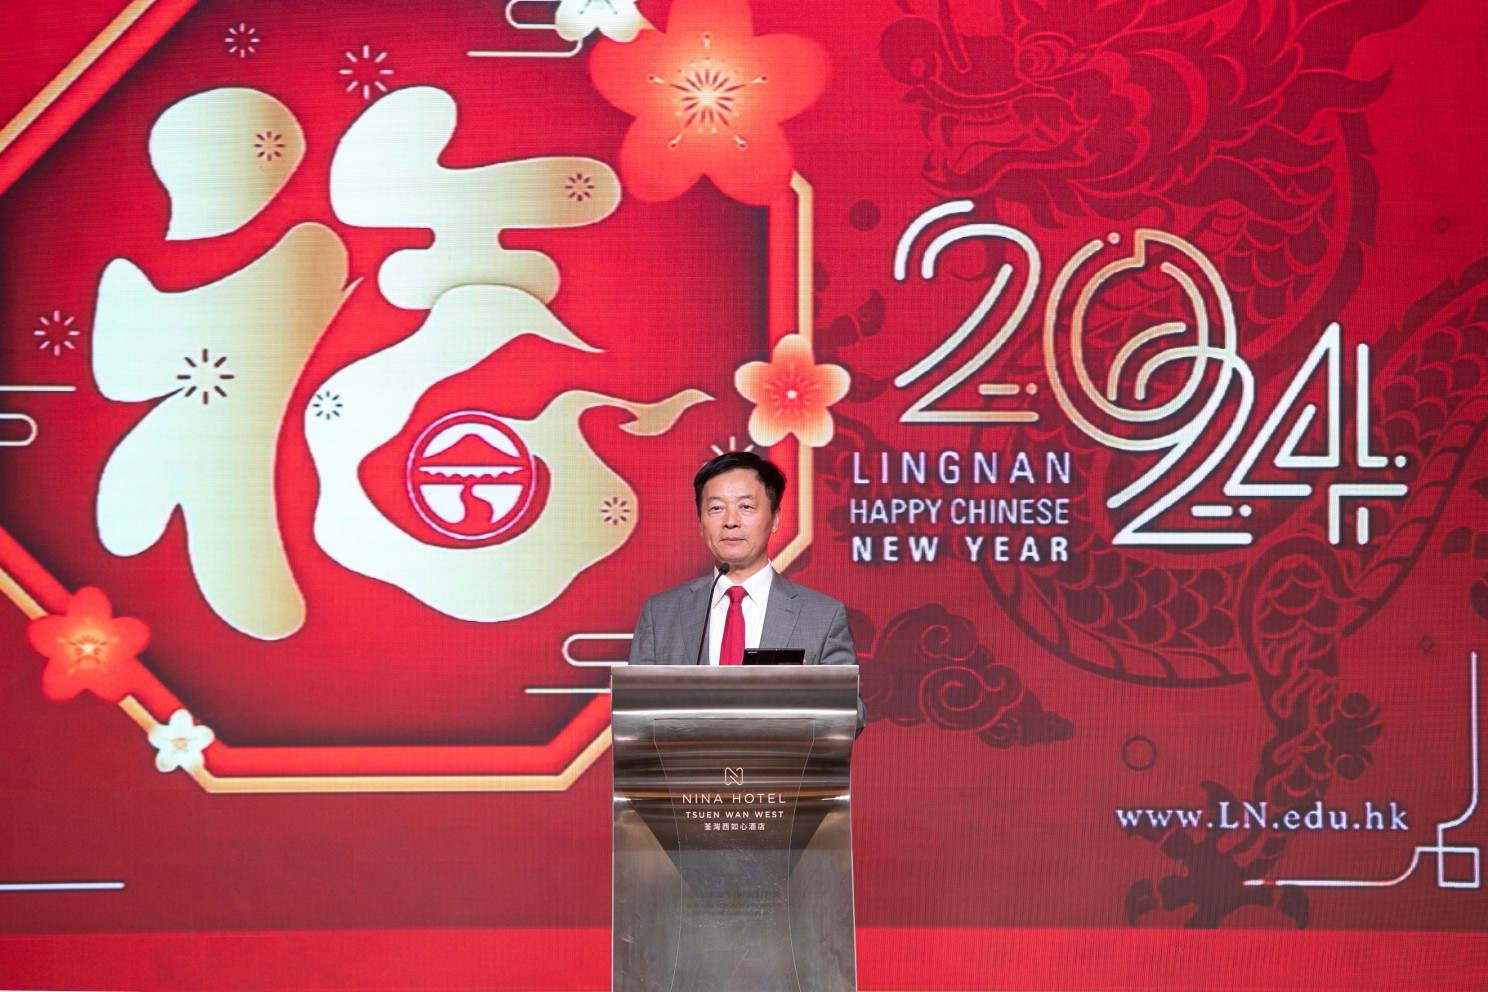 President S. Joe Qin gathers with all university faculty and staff for the first time, expressing Lingnan's commitment to accelerate talent recruitment and introducing various development plans in the digital era.